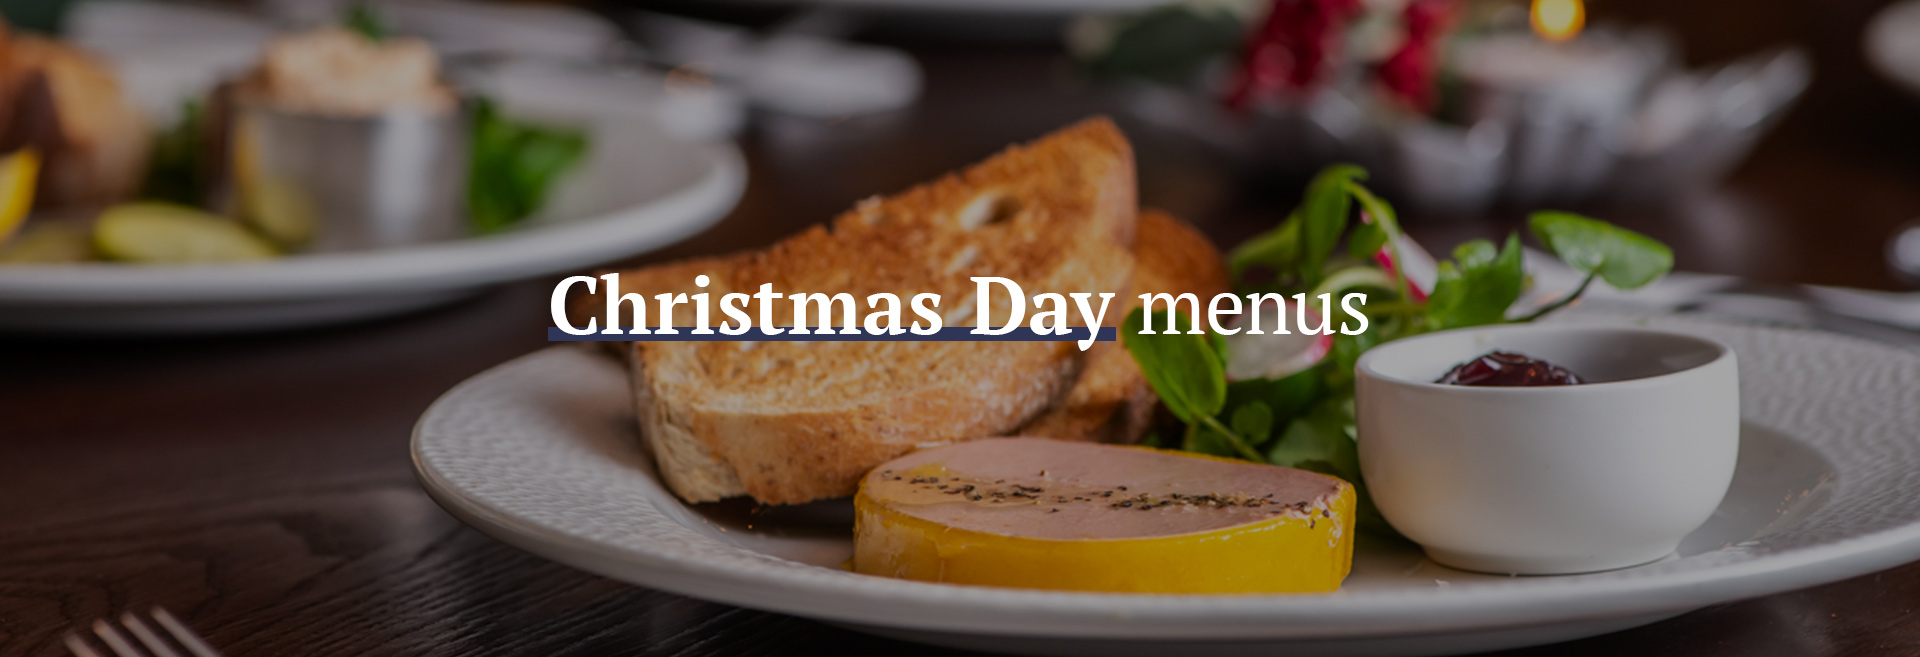 Christmas Day Menu at The Albion Hotel